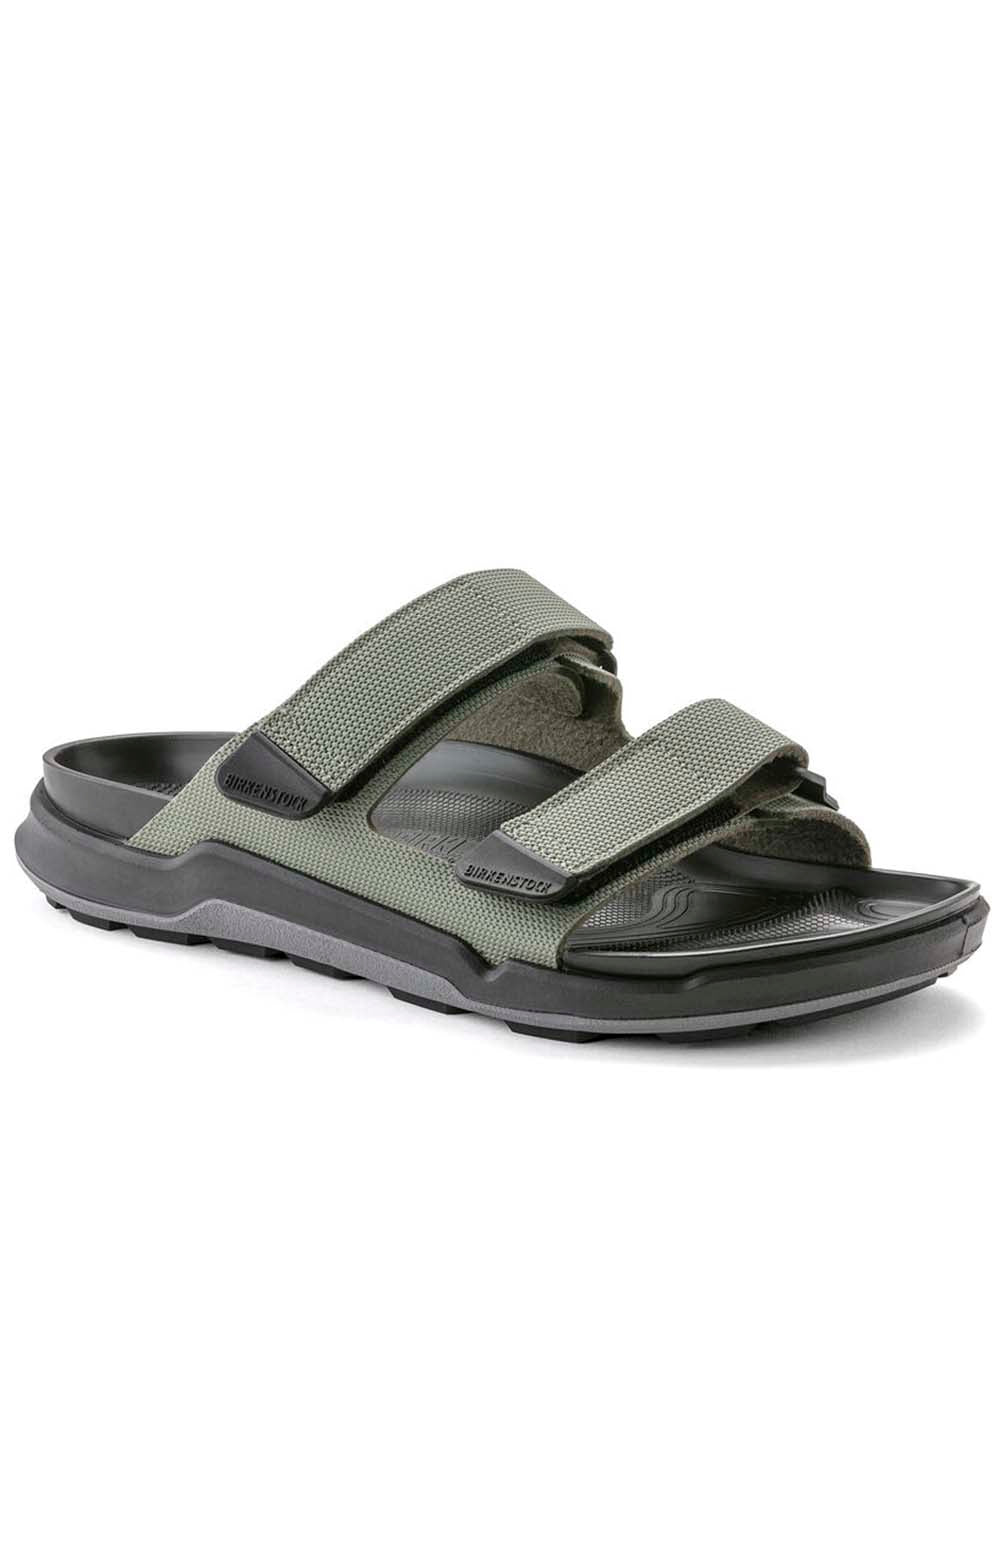 Image of Birkenstock Atacama Sandals Futura Khaki BR1022616, a comfortable and stylish sandal for outdoor adventures and casual wear